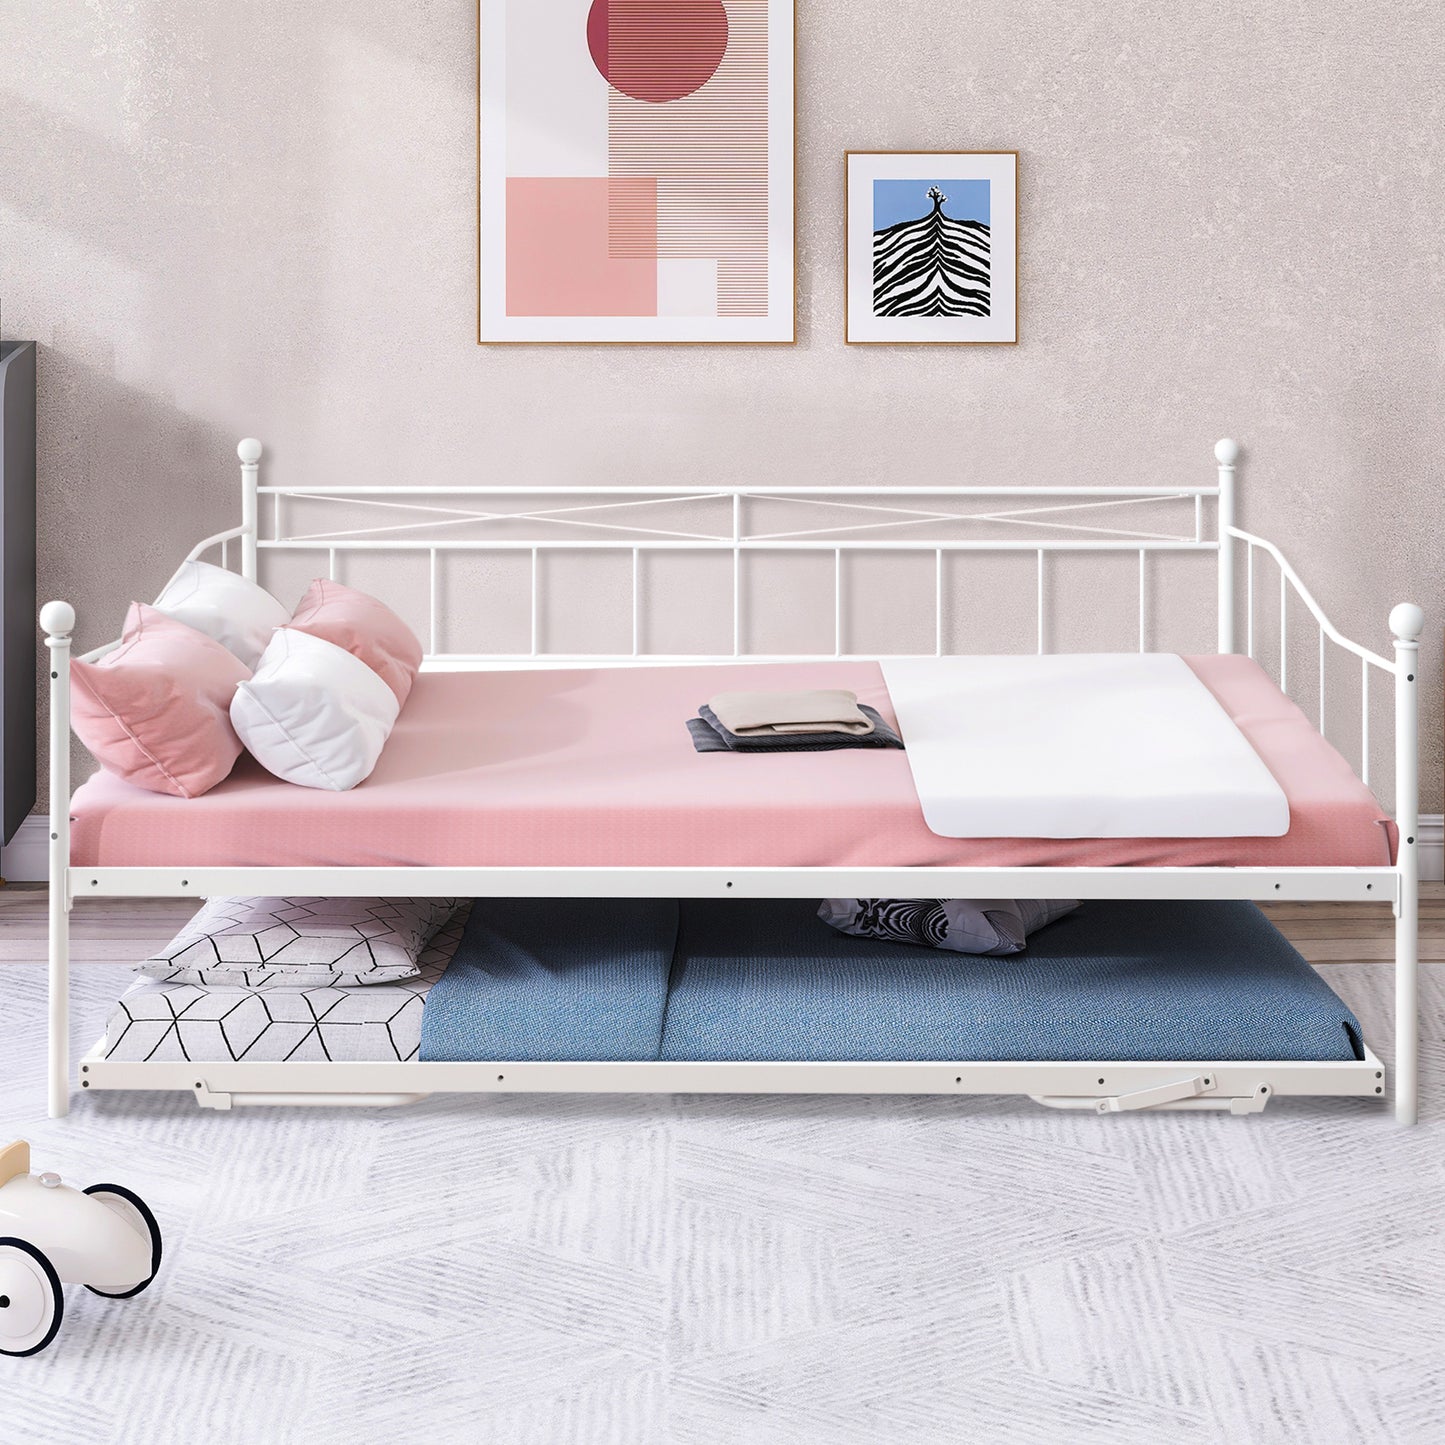 SYNGAR Metal Twin Size Daybed with Roll-Out Trundle, Multifunctional Platform Portable Folding Trundle Bed Frame, Mattress Foundation/Children Bed Sofa for Guest Living Room, Black